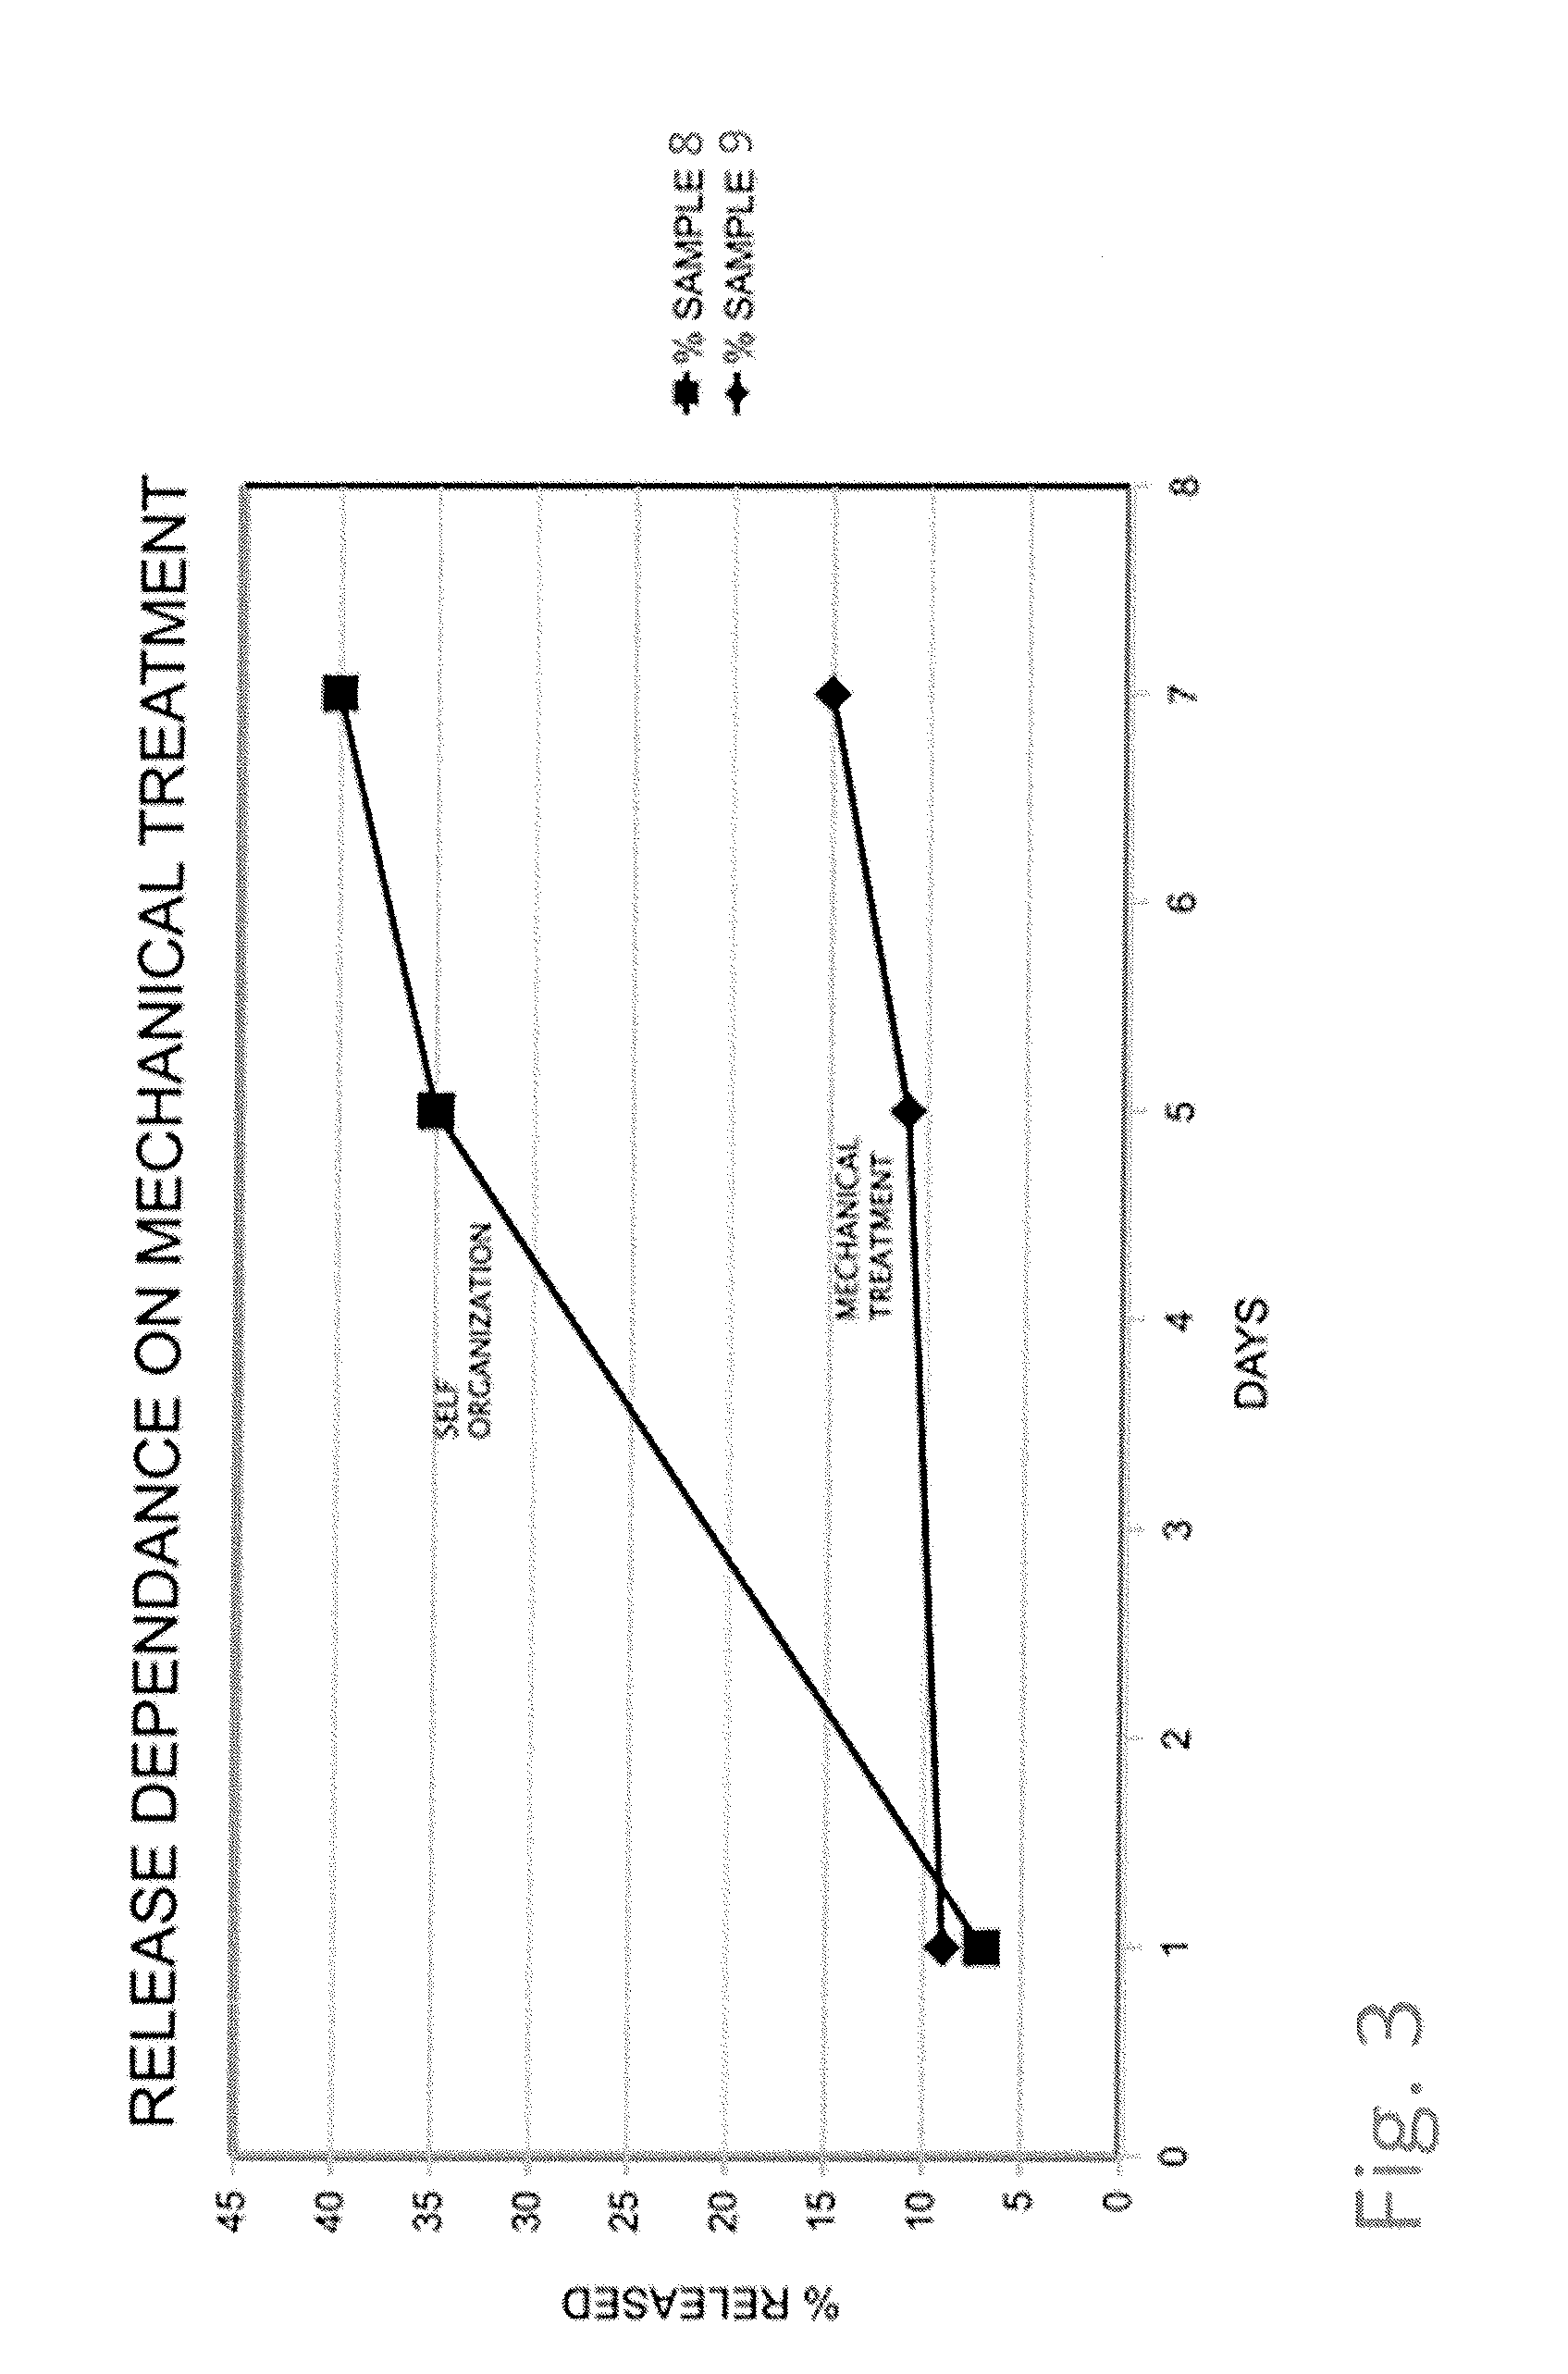 Hydrophobic drug-delivery material, method for manufacturing thereof and methods for delivery of a drug-delivery composition